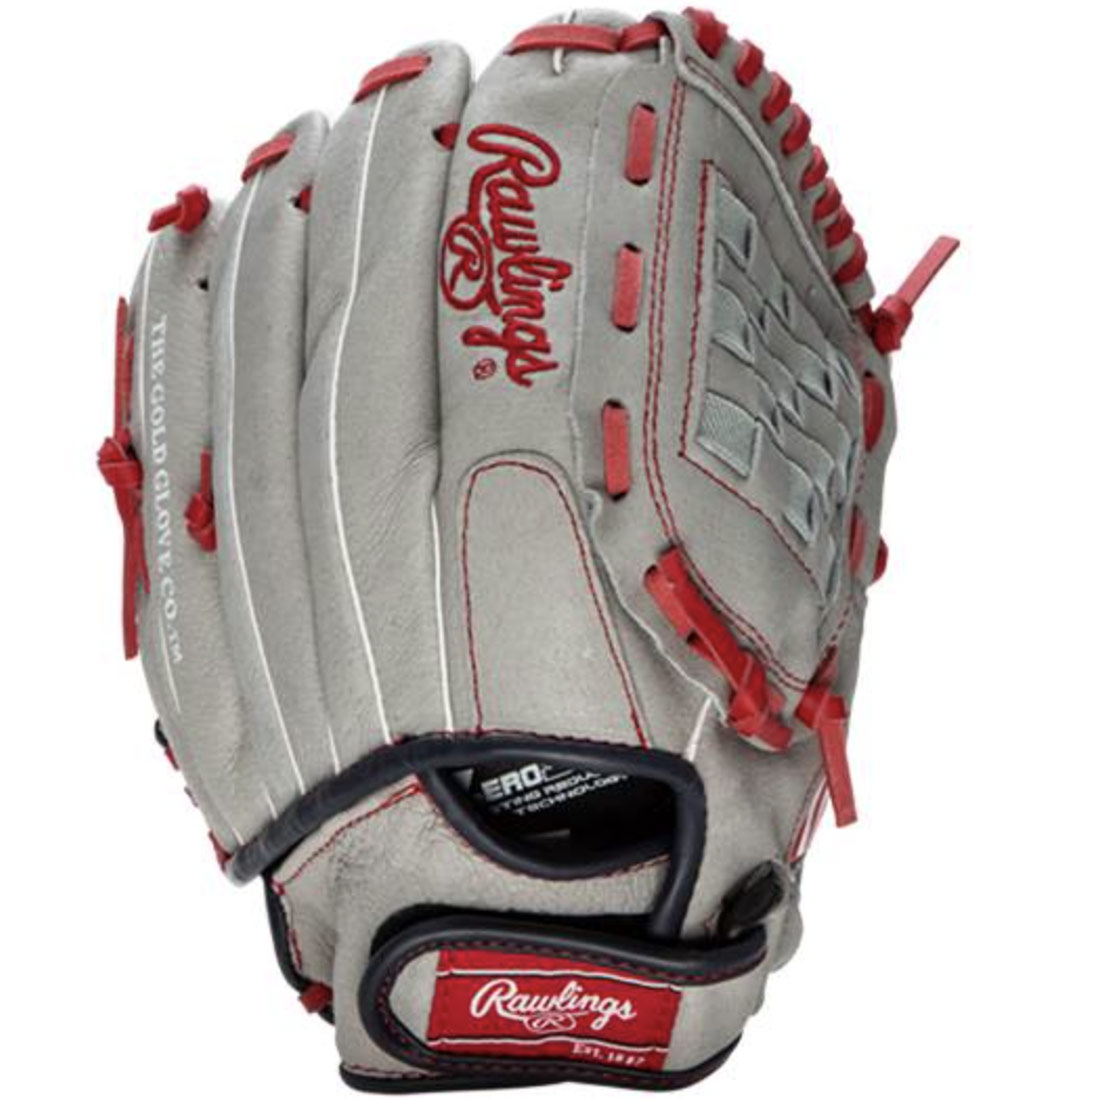 Rawlings Sure Catch Mike Trout Youth Baseball Glove 11\" SC110MT